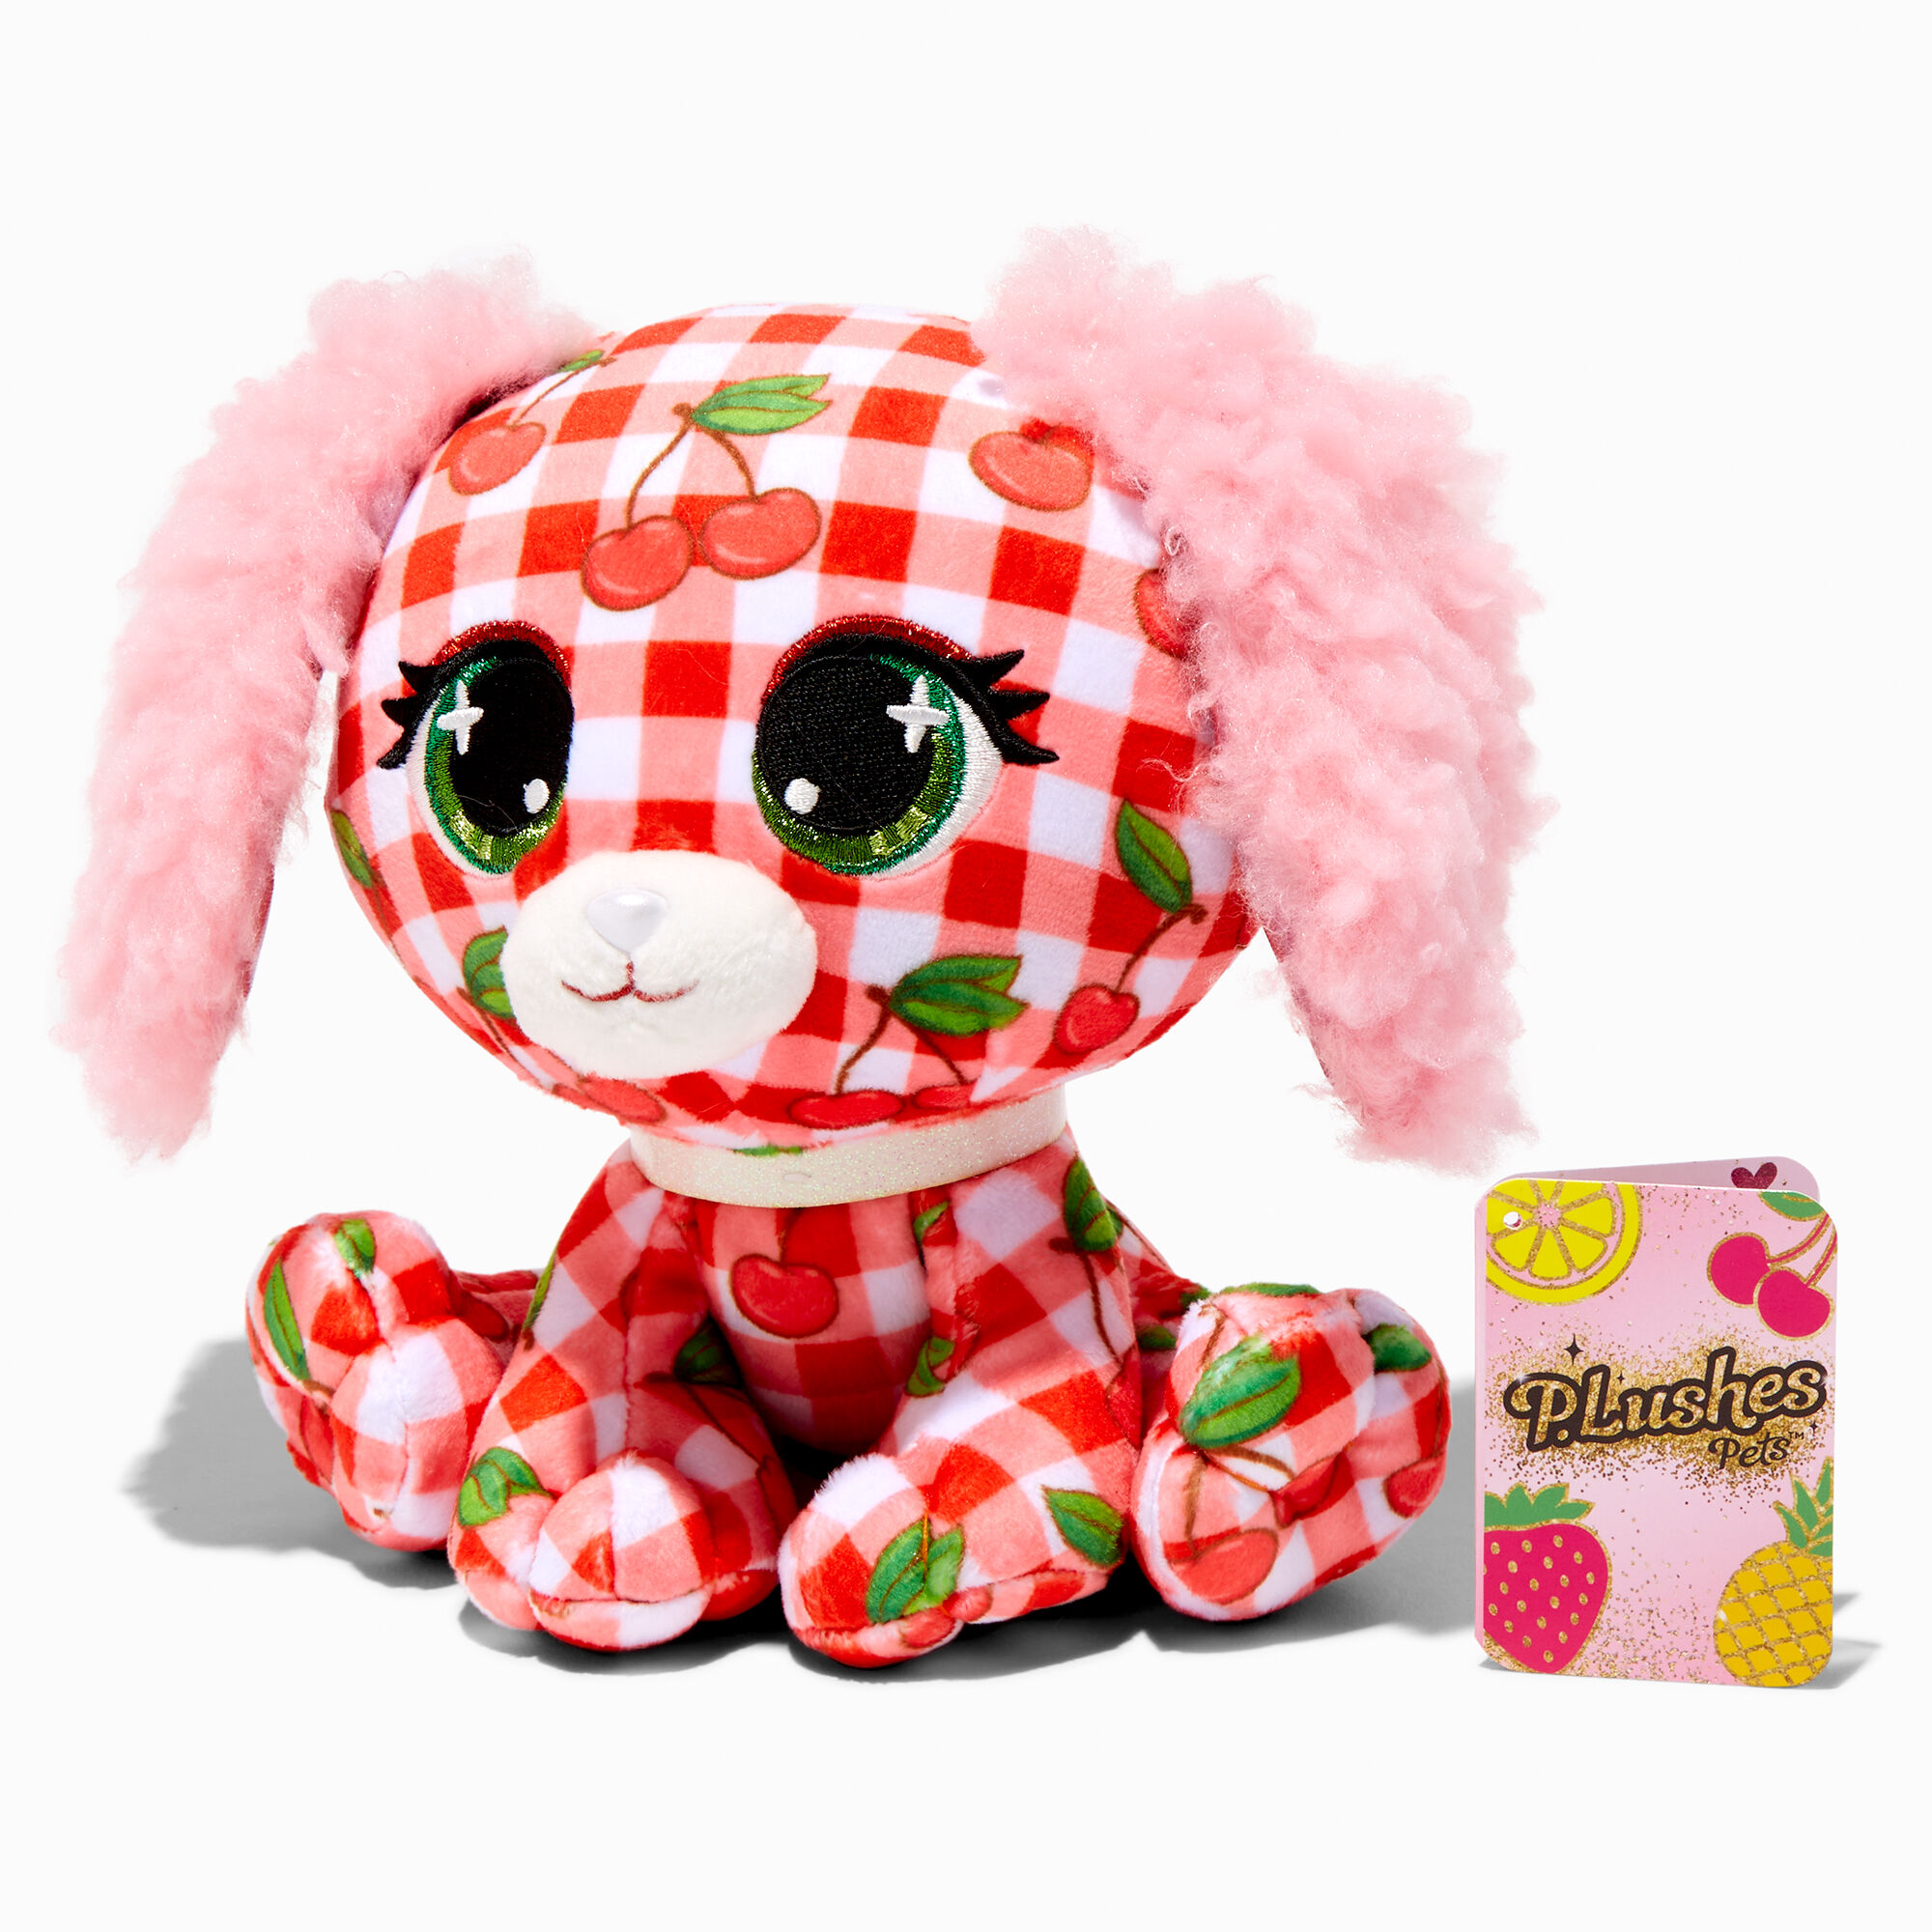 View Claires Plushes Pets Juicy Jam Collection Summer Cerise Soft Toy information